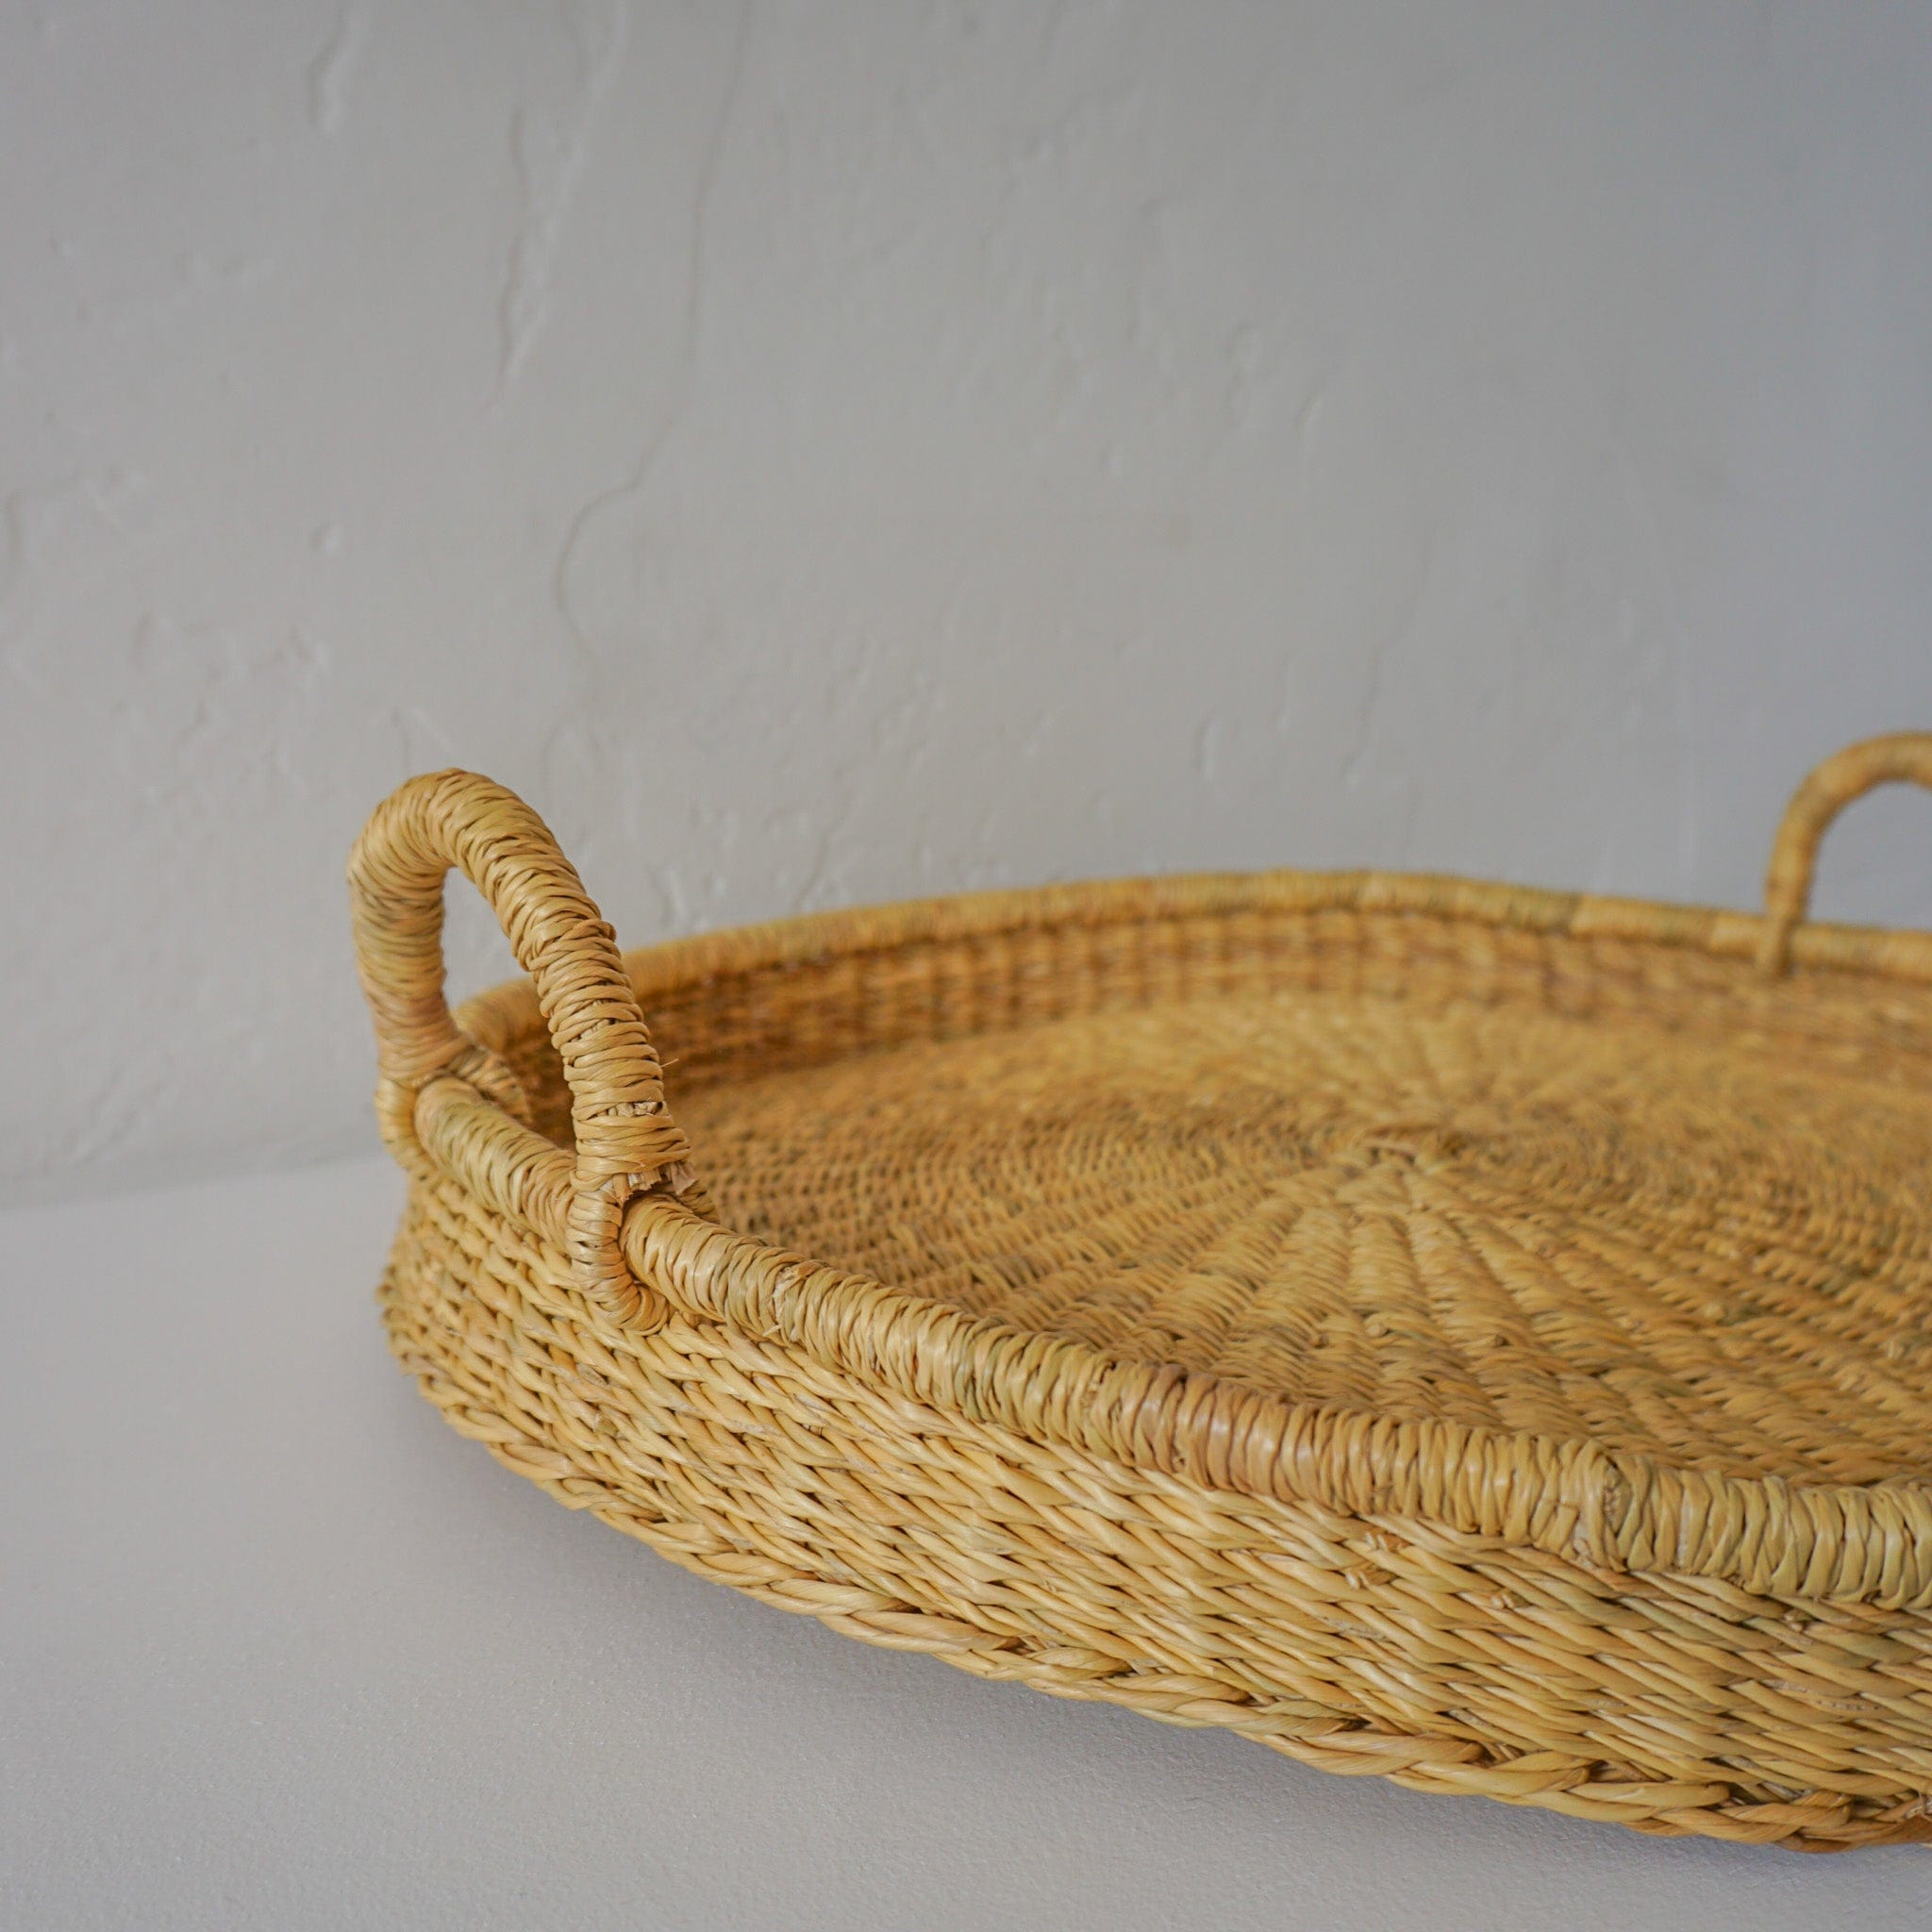 Woven Worldwide Baskets Woven Round Tray w/ Handles